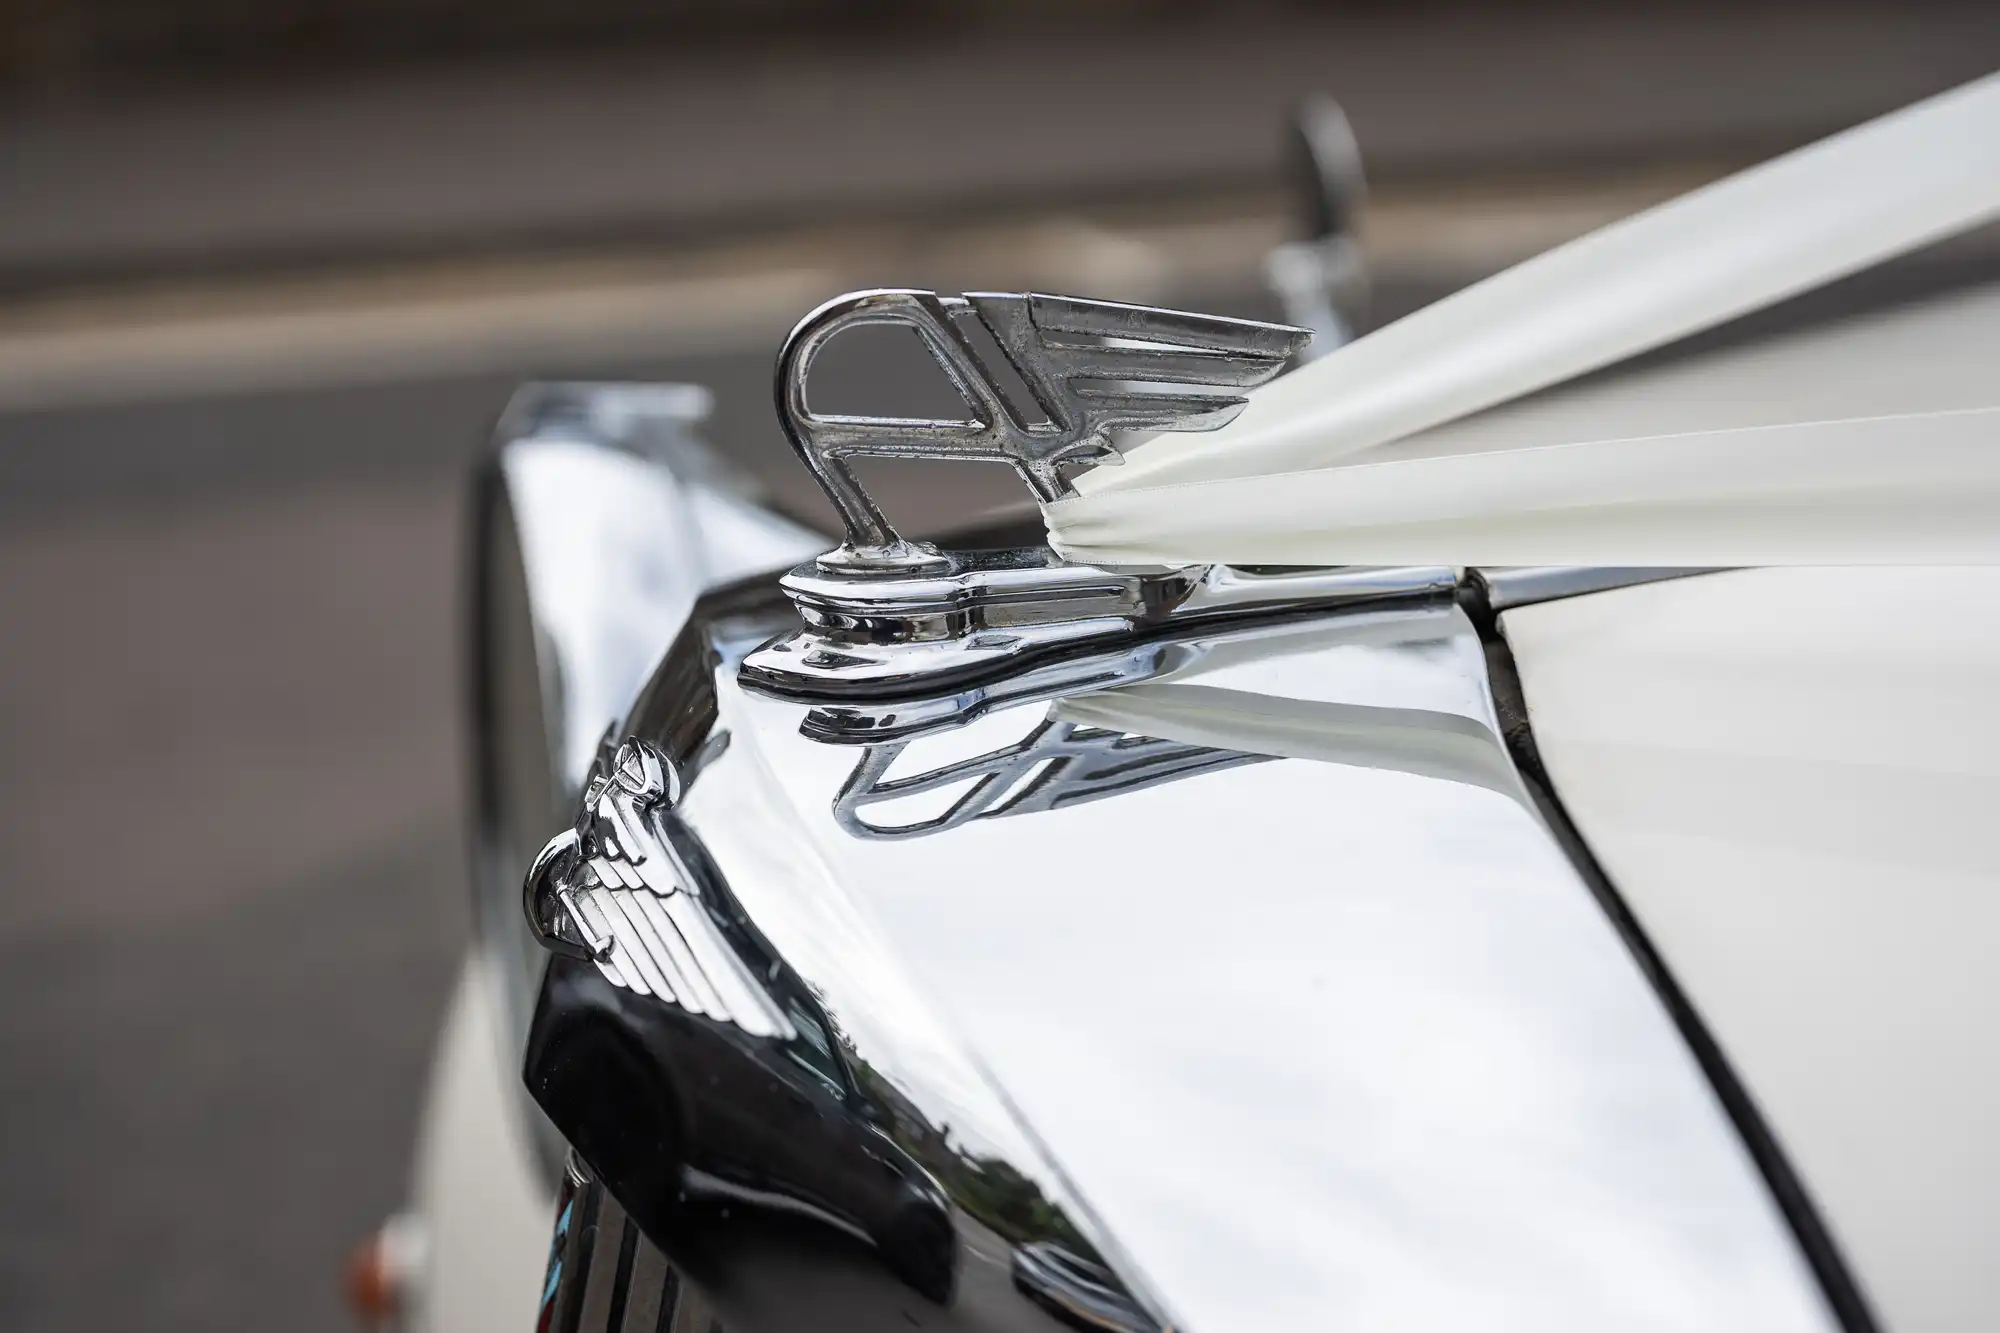 Close-up of a shiny, chrome hood ornament on a vintage car, showcasing intricate detailing against a sleek, white body.